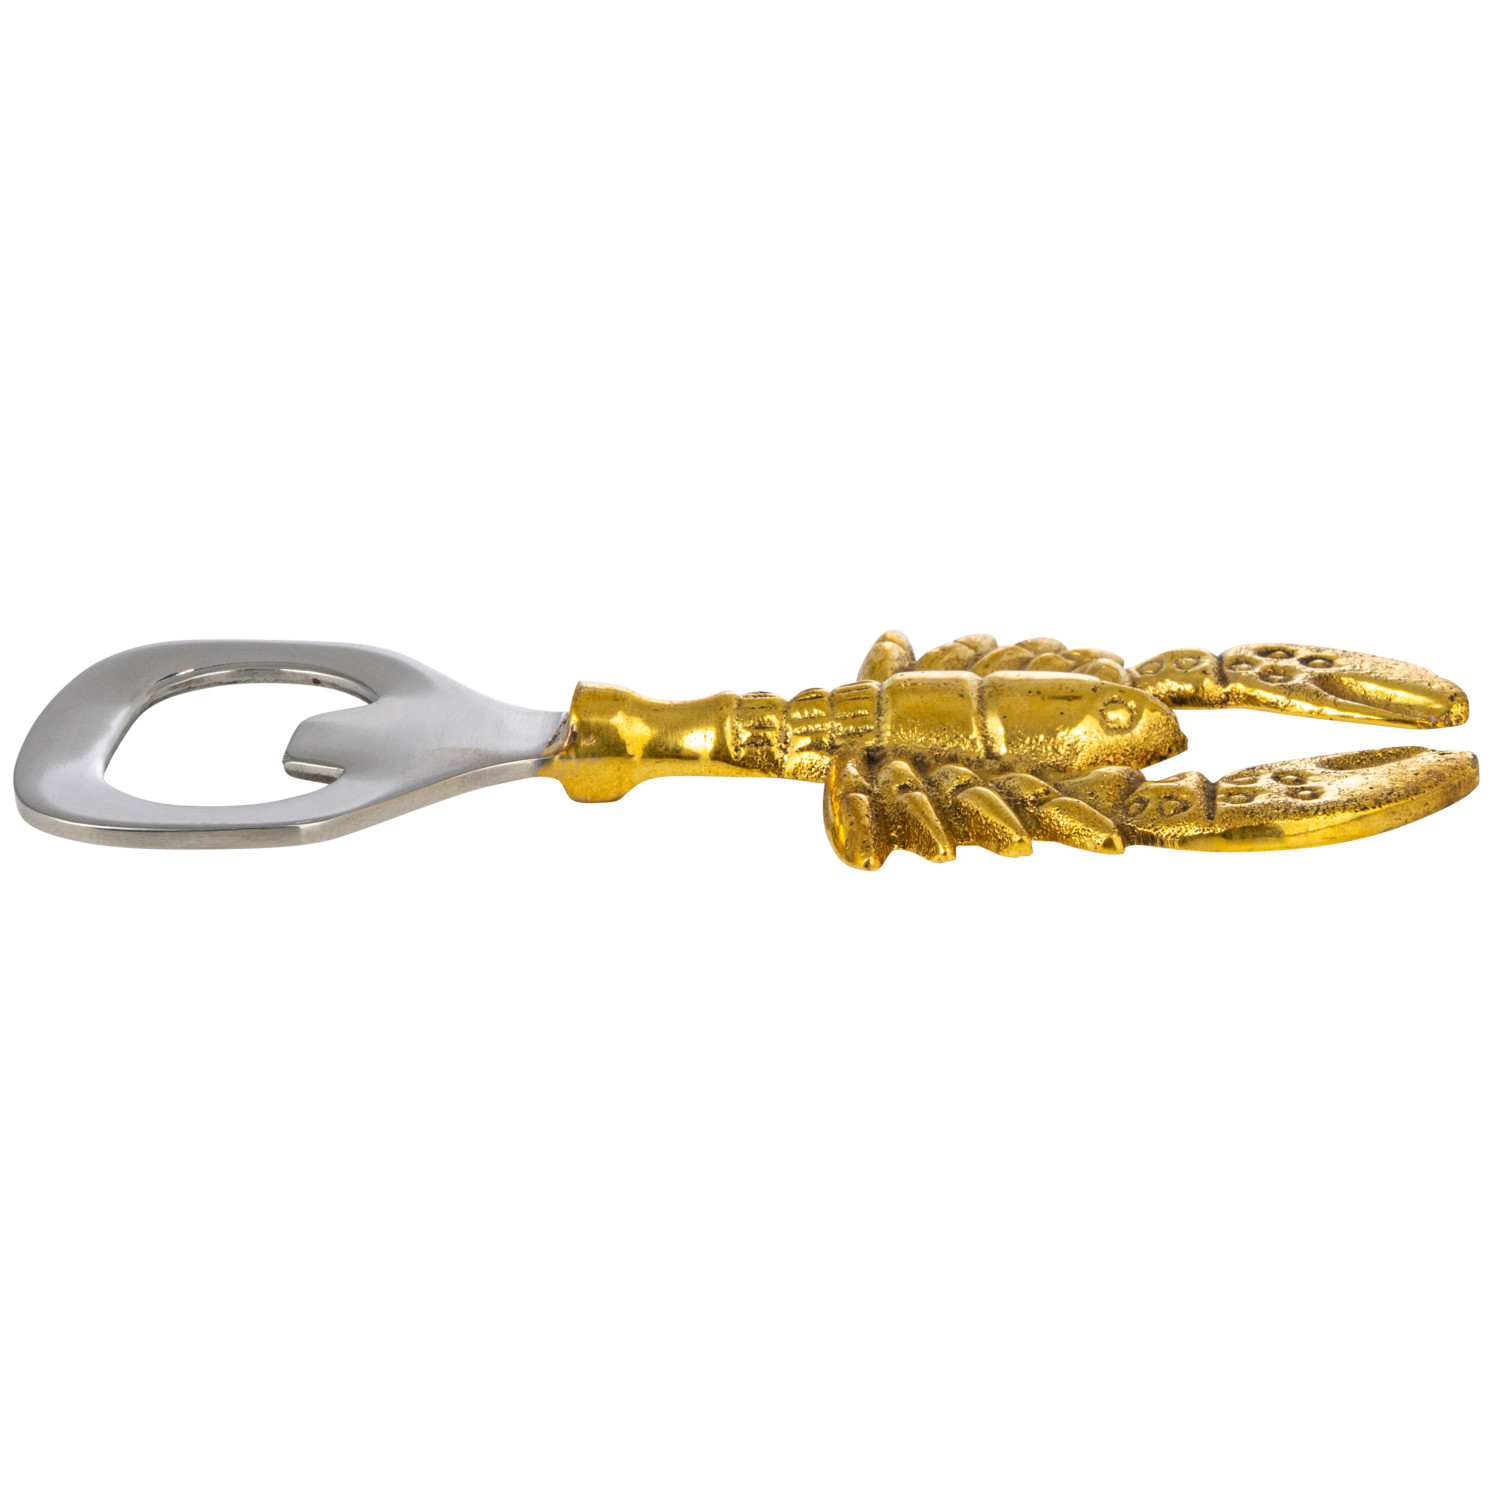 Steel and Brass Bottle Opener with Lobster Shaped Handle - 4-1/2-in